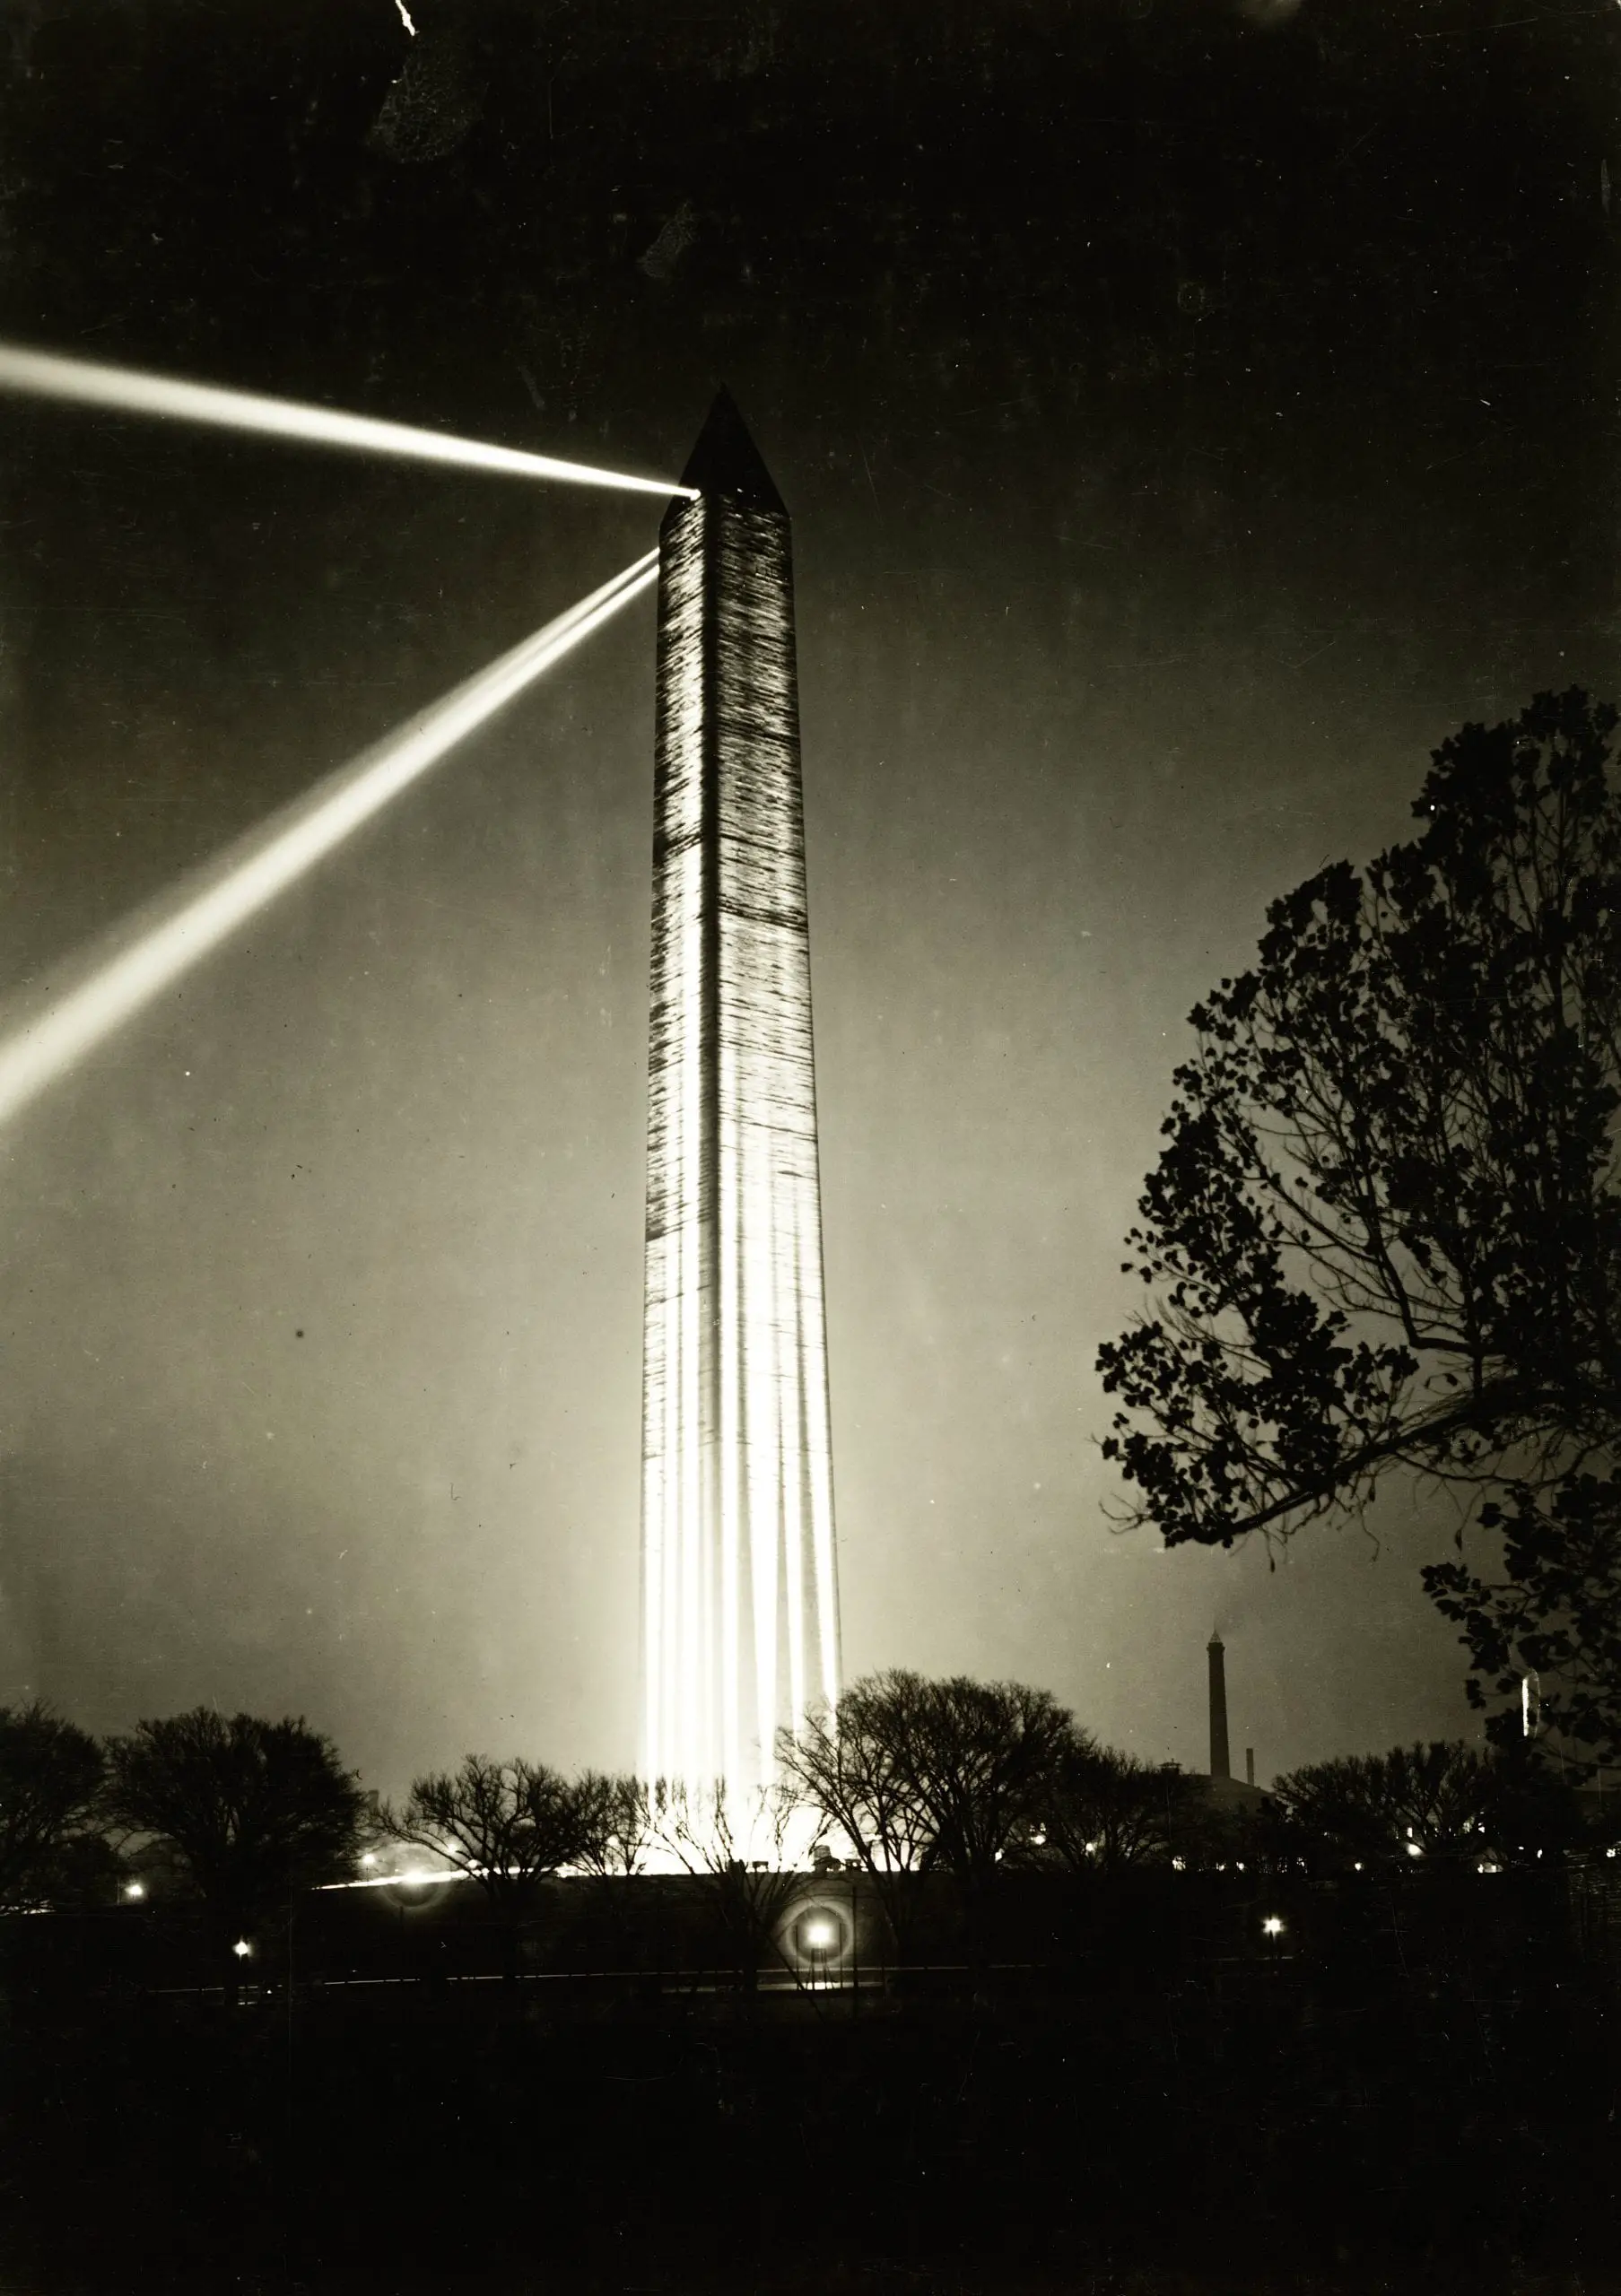 Photograph shows lights beaming from the top of the Washington Monument at night, also large lights on the ground, directed up, illuminating the sides.